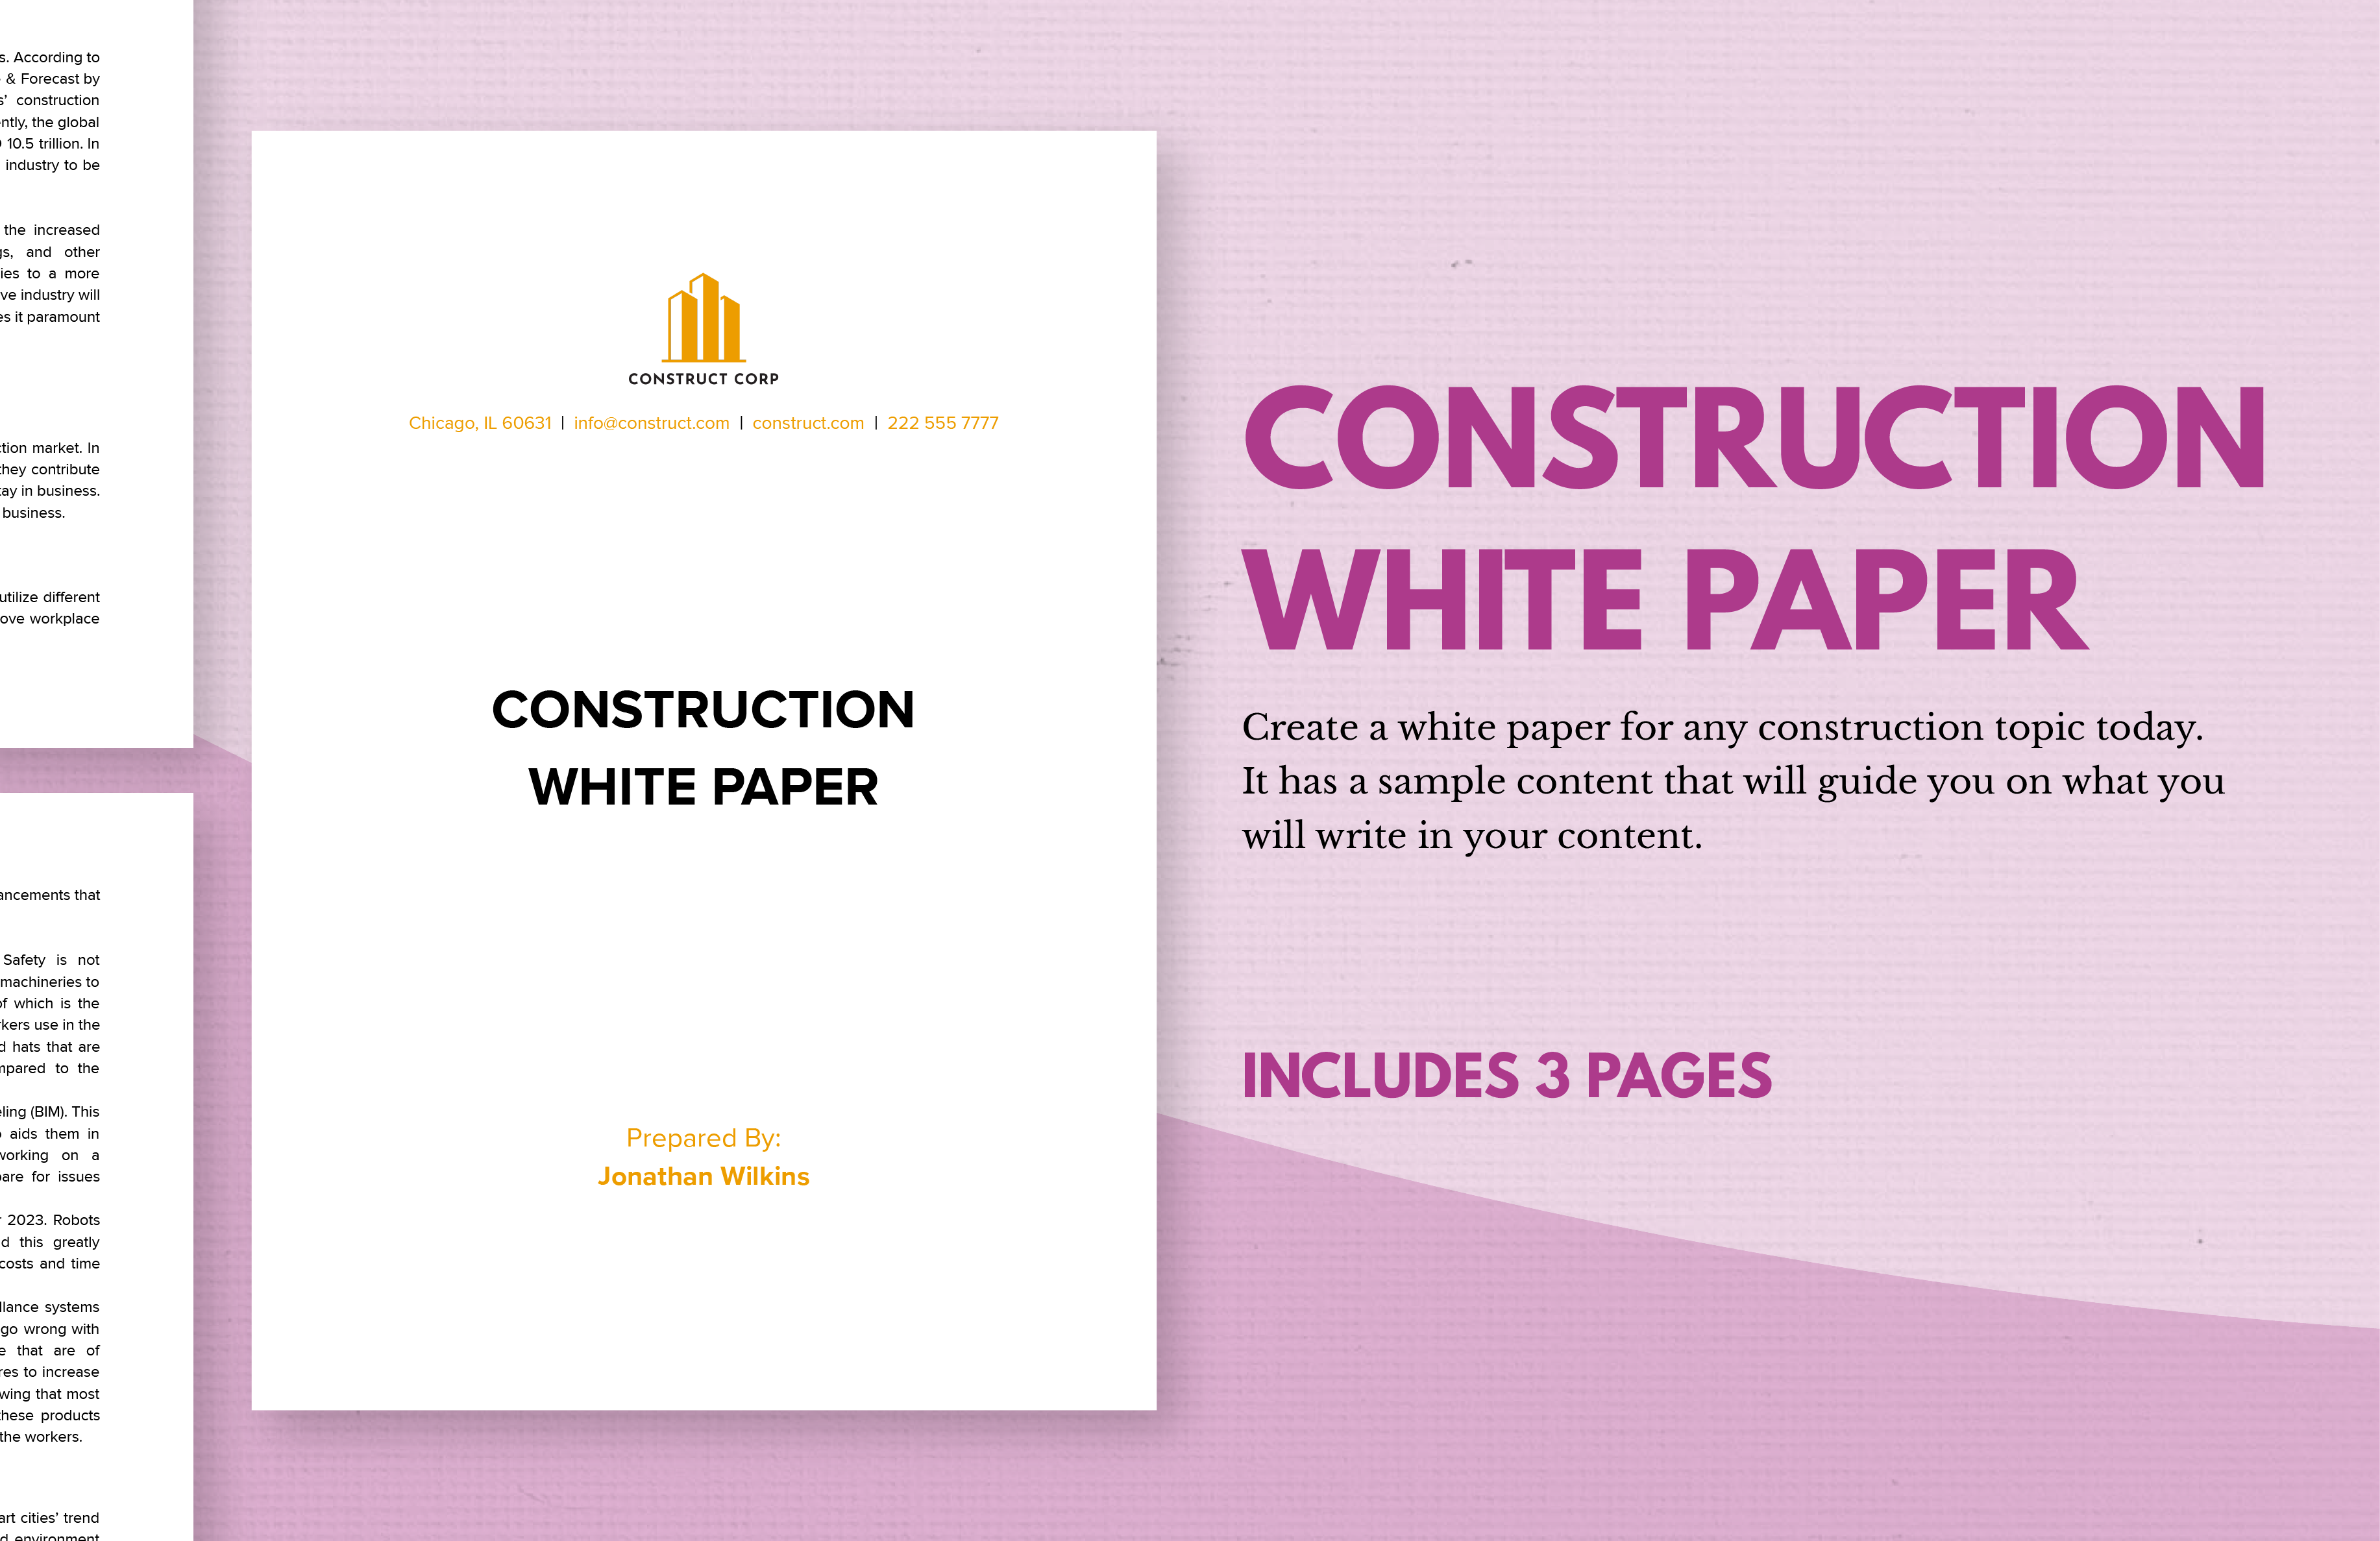 construction white papers ideas examples